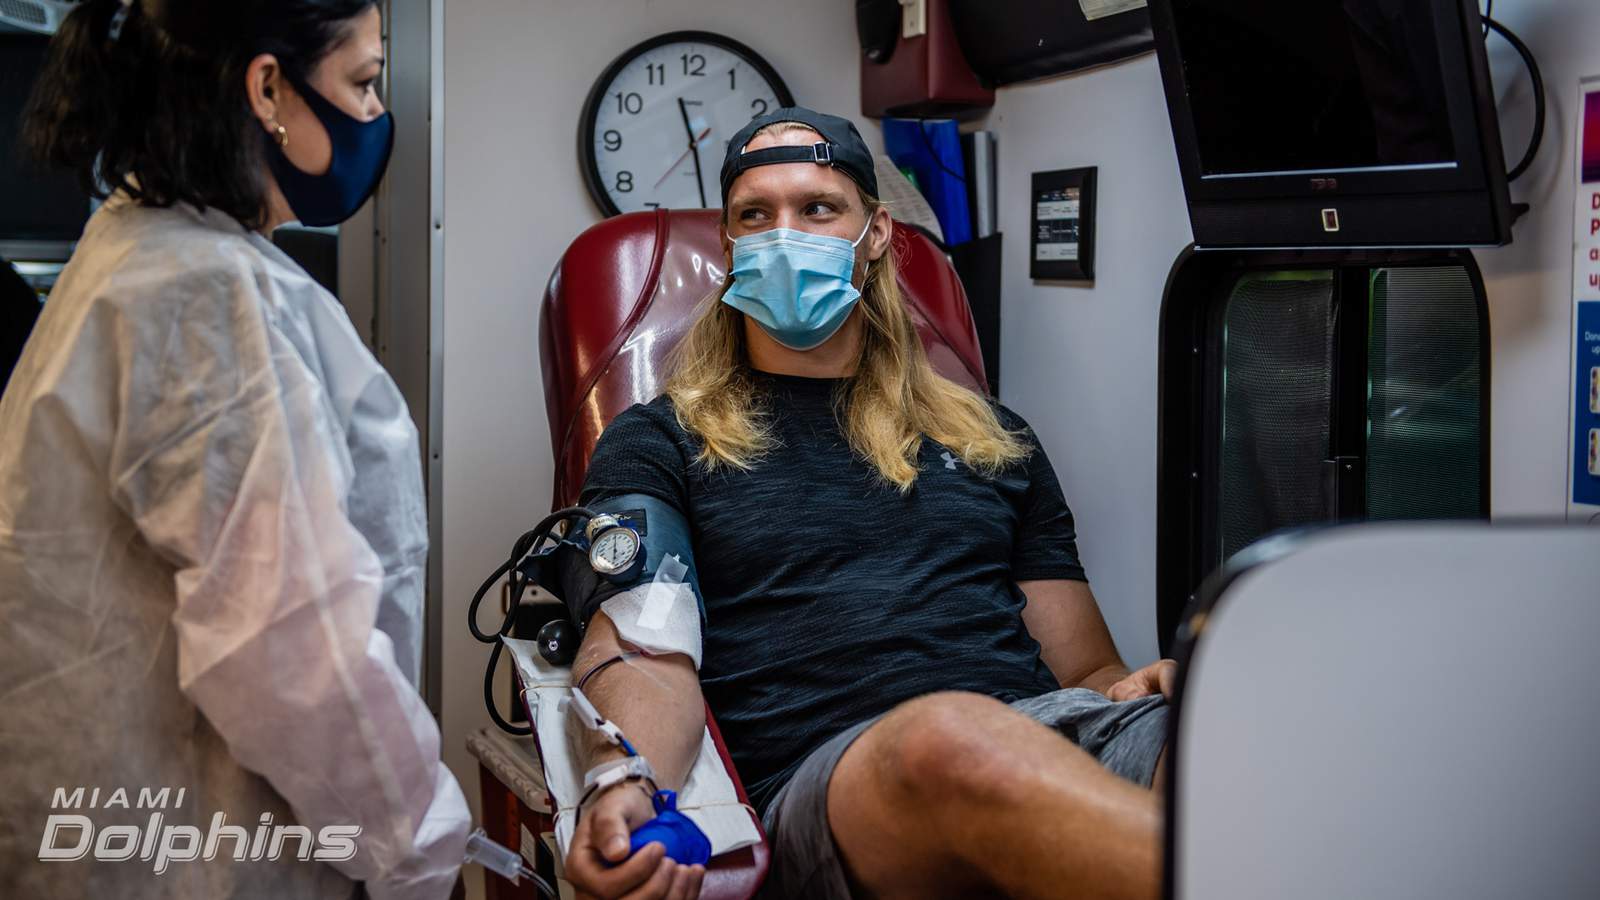 Dolphins players recover from COVID-19, donate plasma to help fight virus